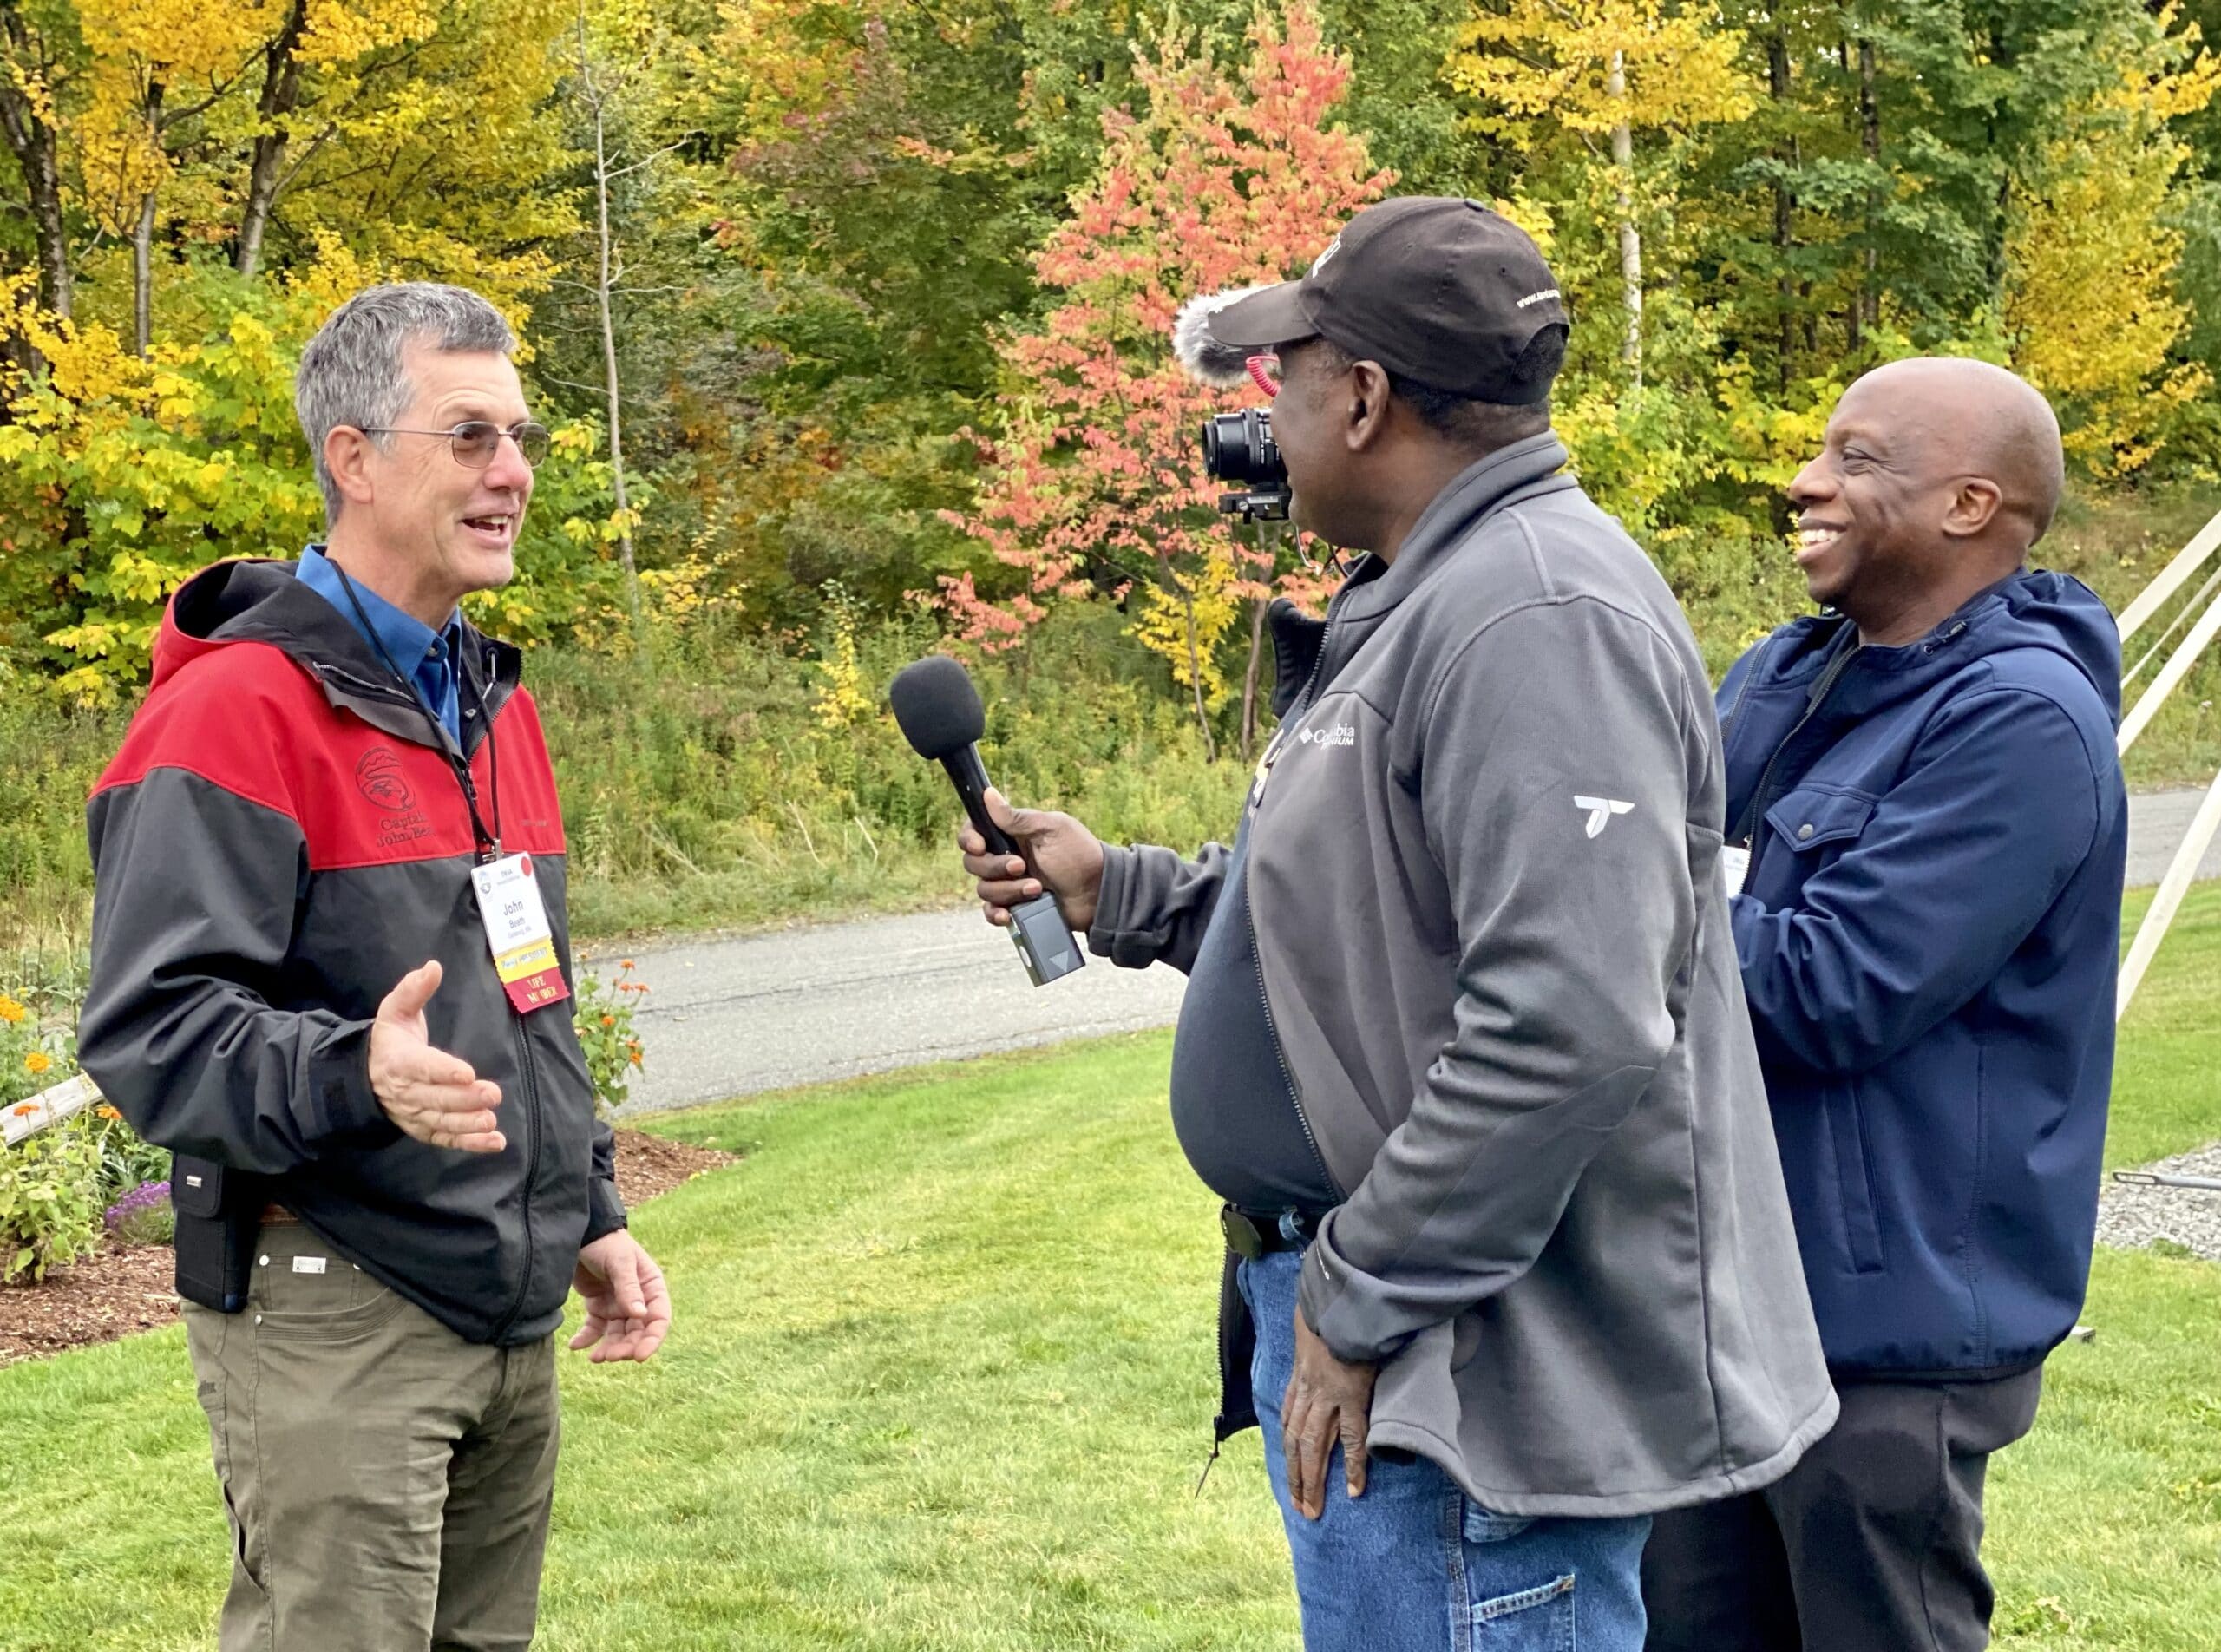 Two media members interview an Outdoor Writers Association conference attendee in Vermont